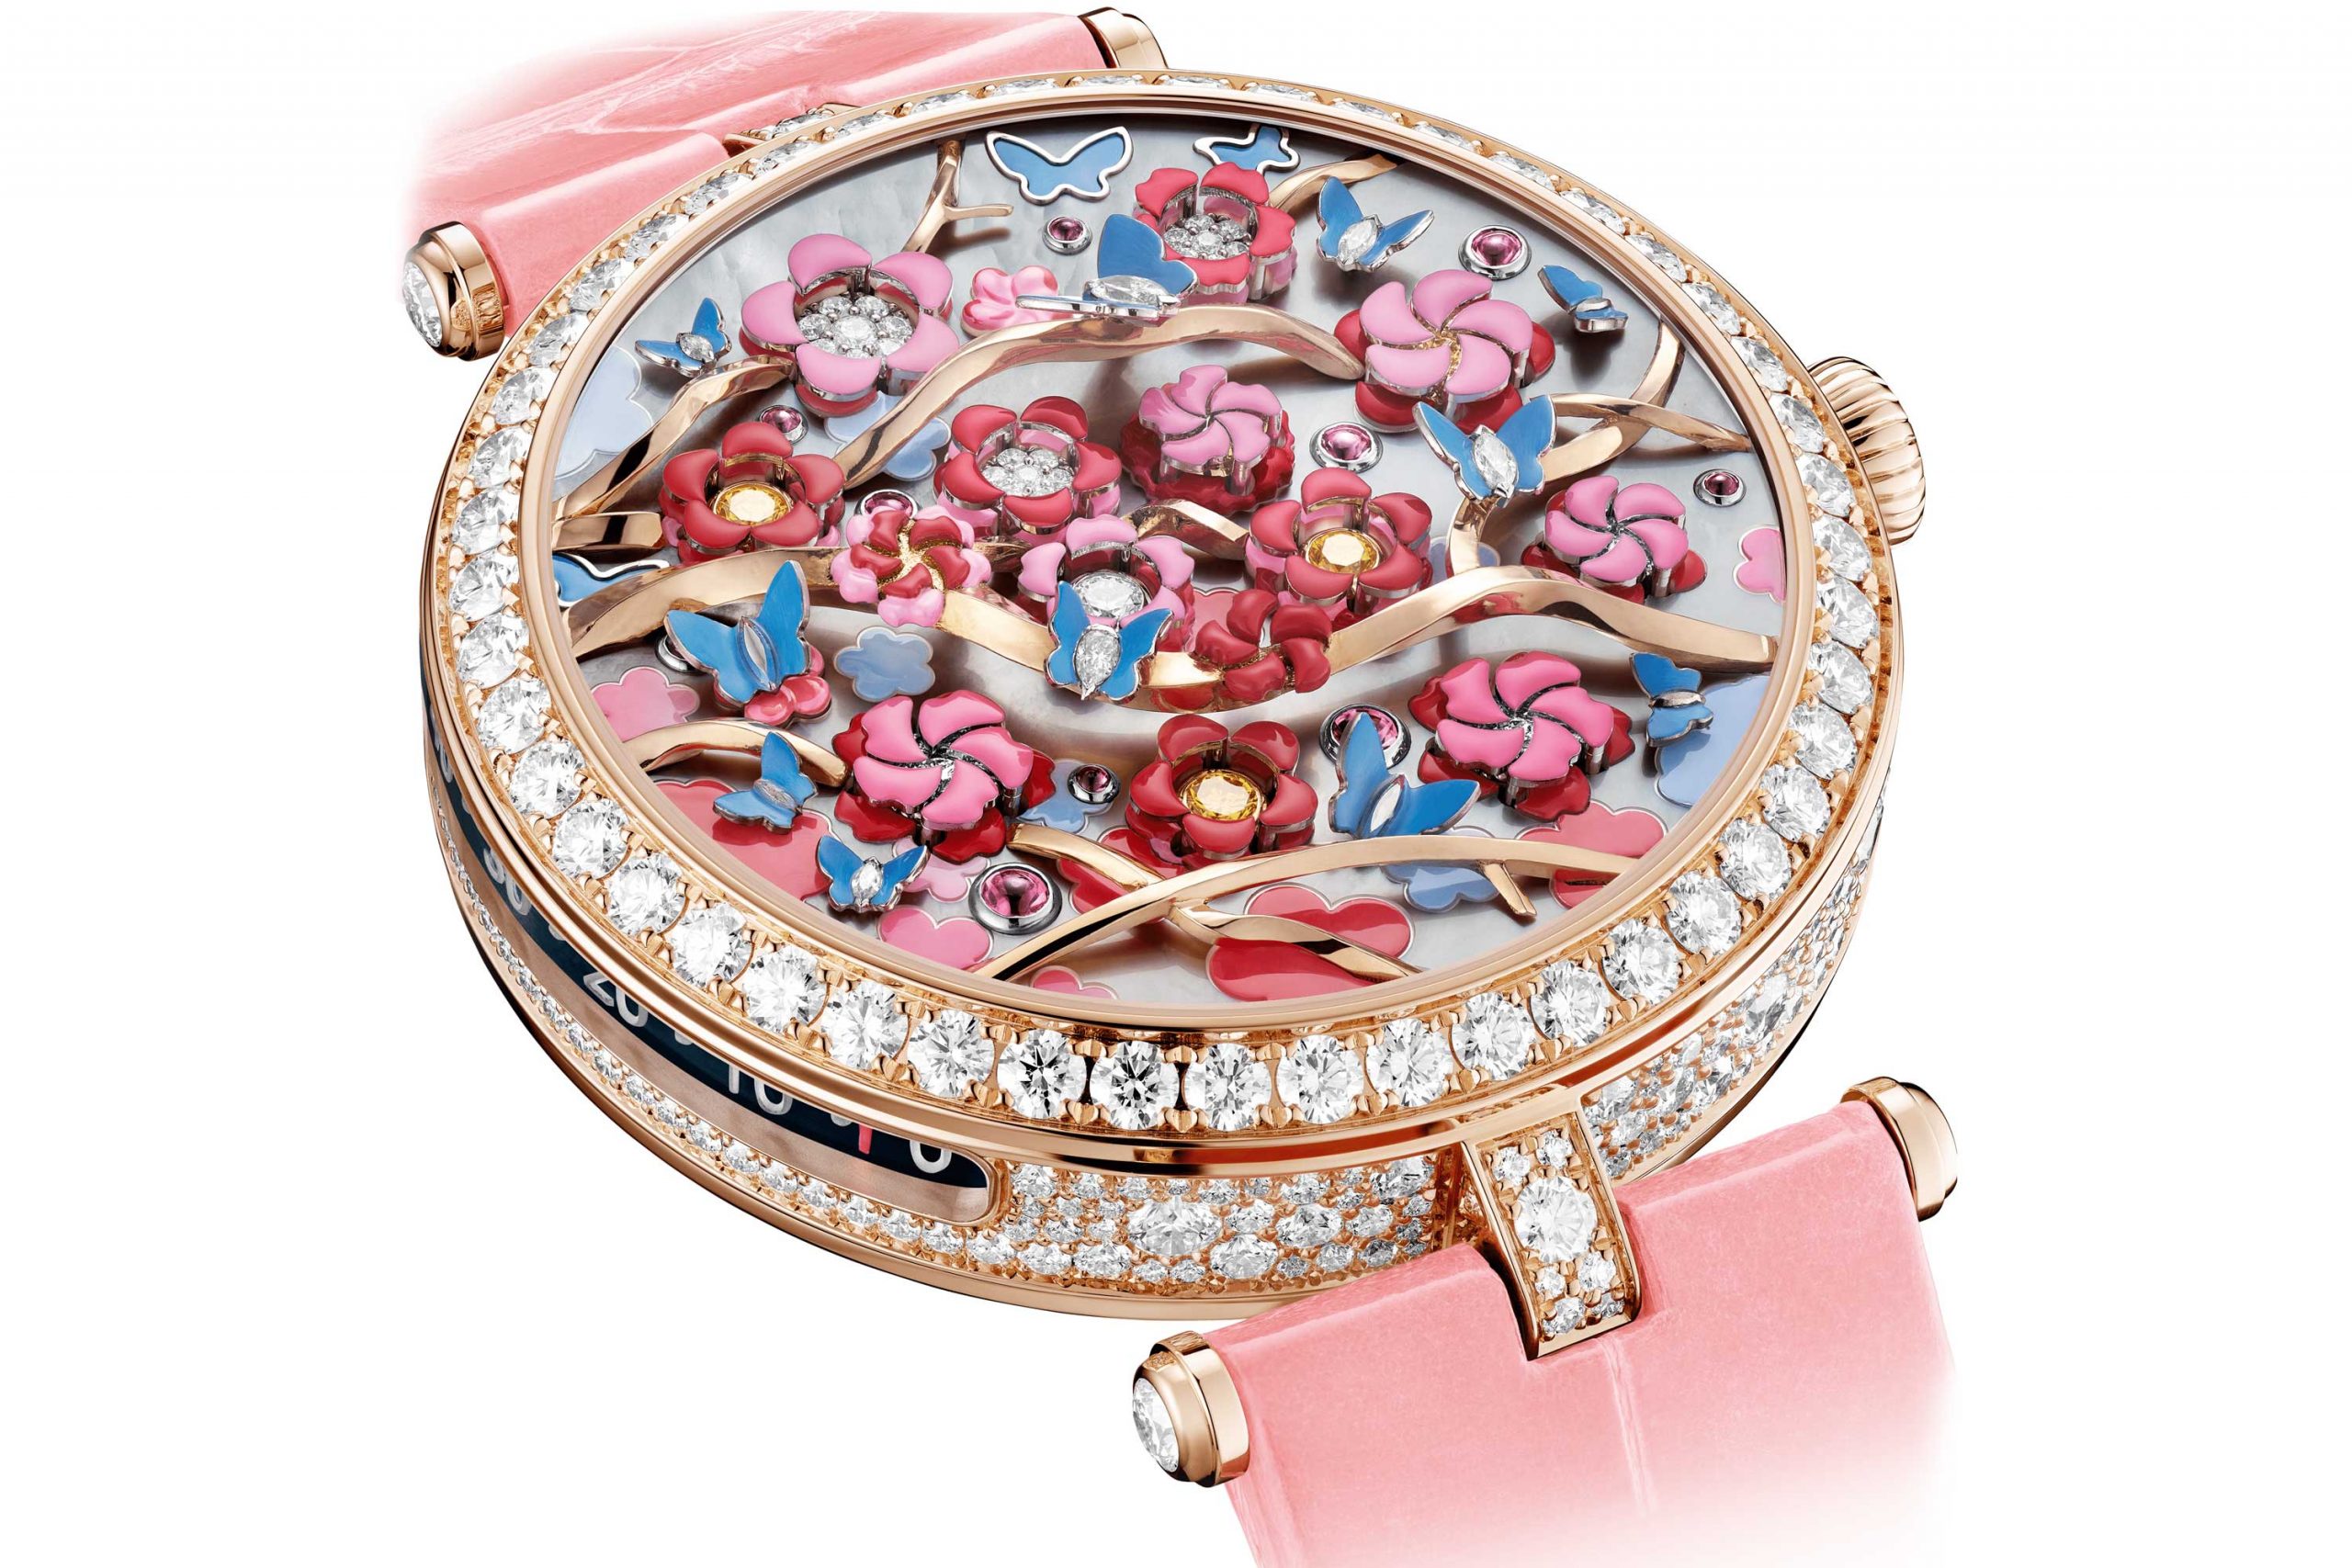 Lady Arpels Heures Florales Cerisier tells the time in a warm color palette of spring pinks and reds